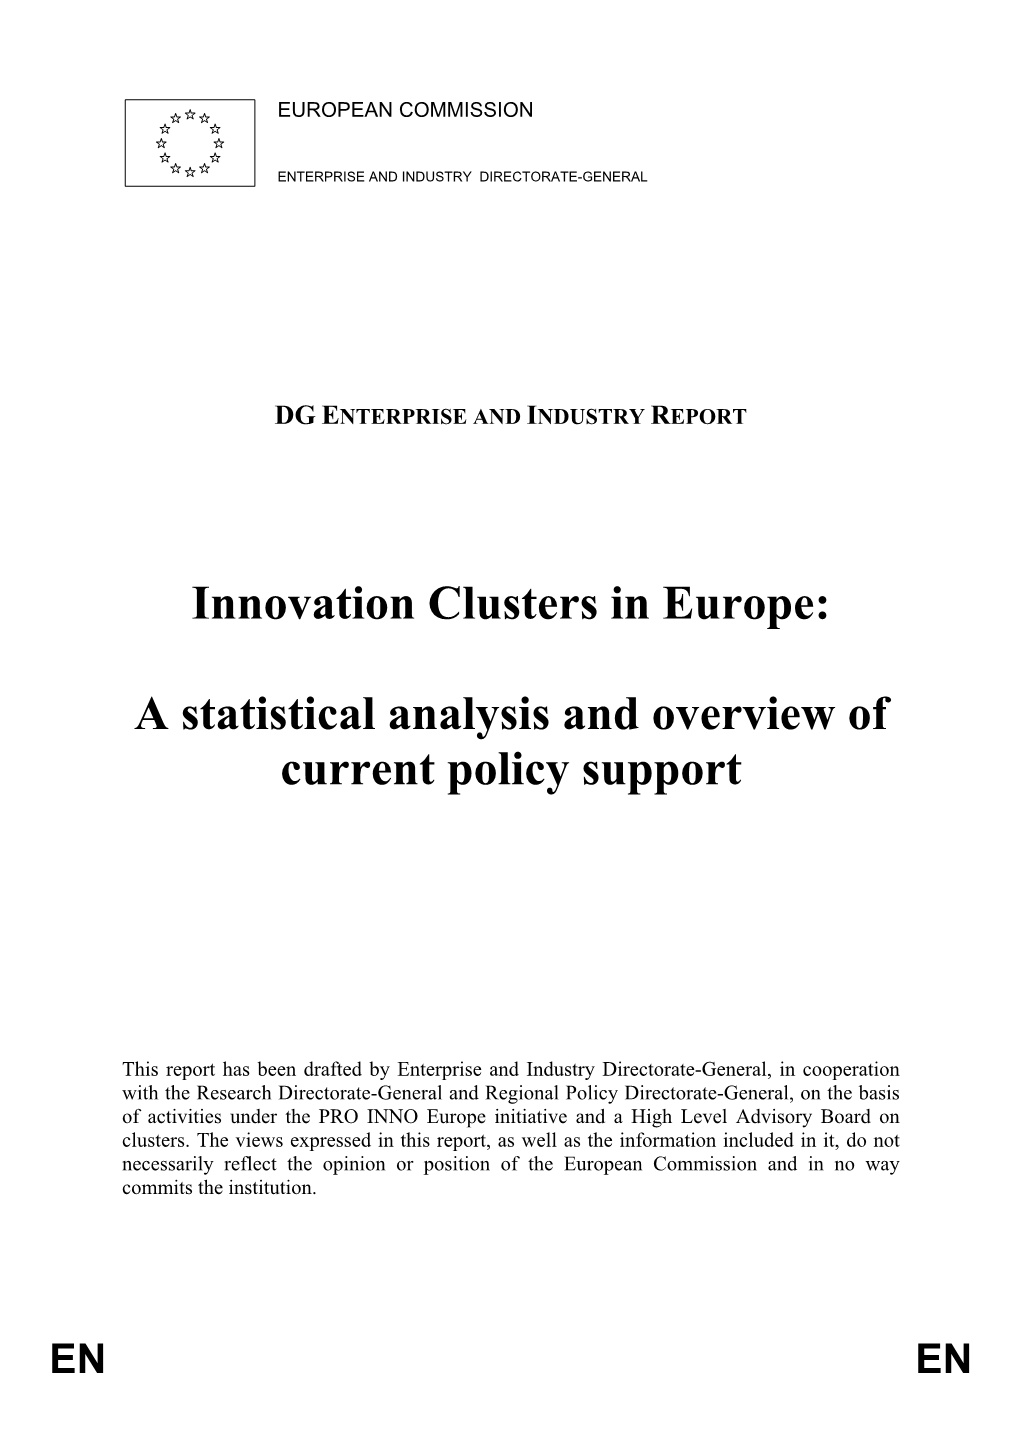 Innovation Clusters in Europe: a Statistical Analysis and Overview Of